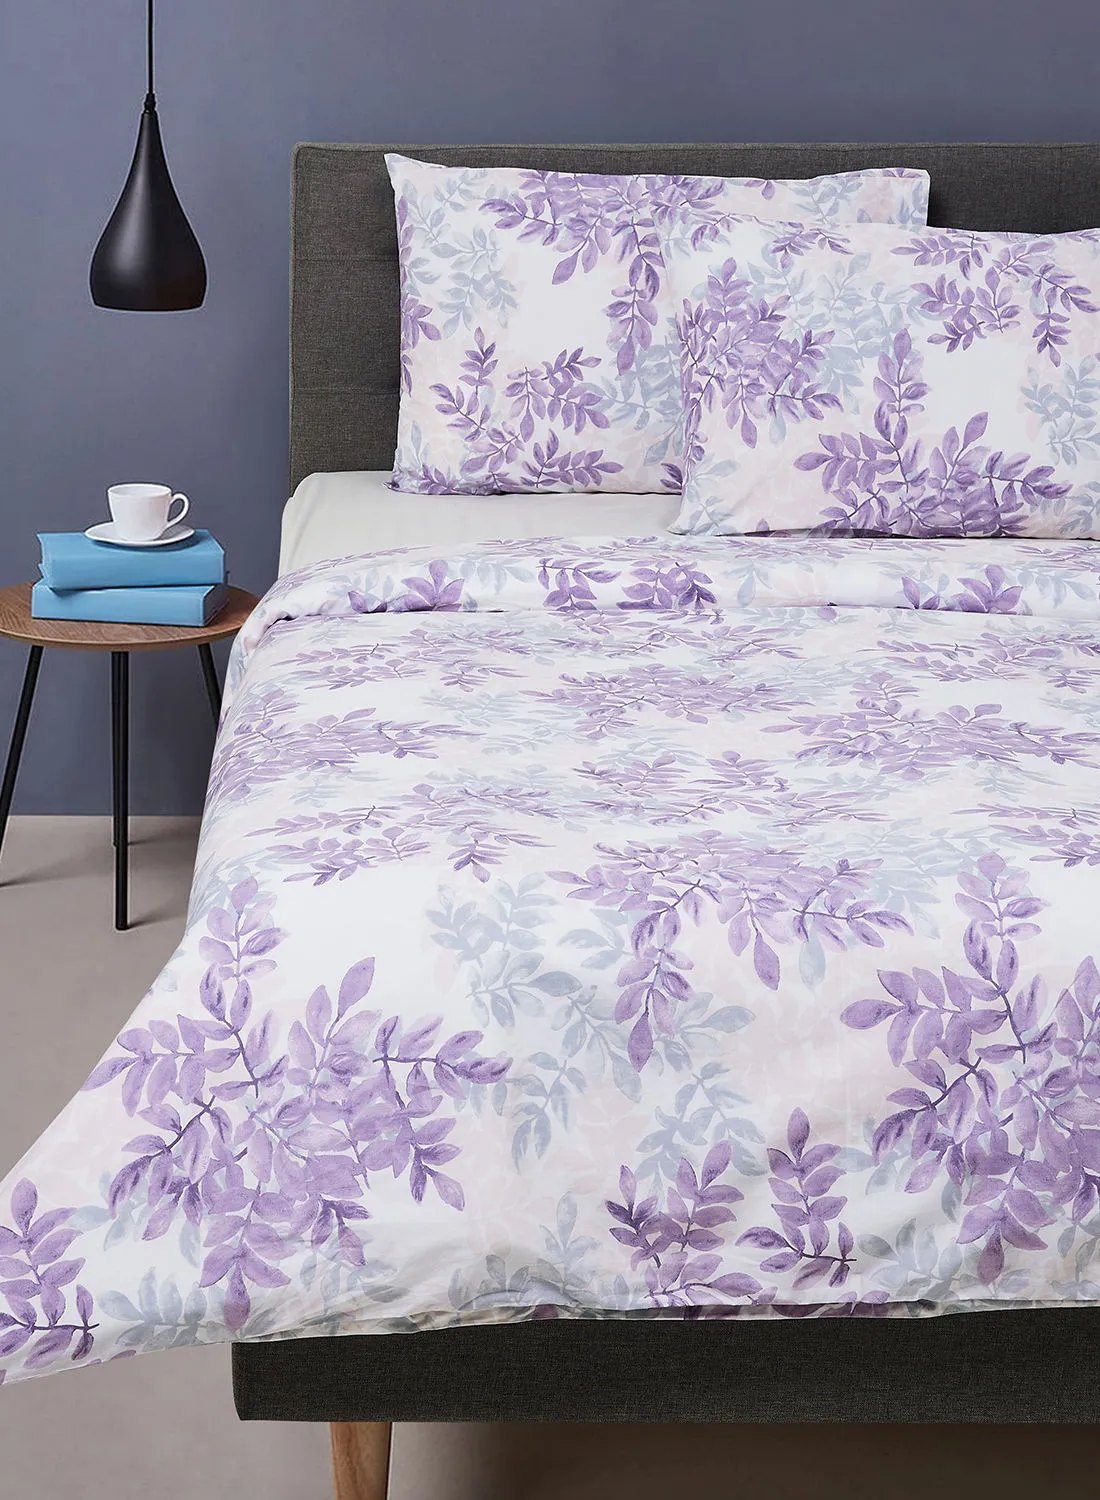 noon east Duvet Cover With Pillow Cover 50X75 Cm, Comforter 200X200 Cm, - For Queen Size Mattress - Leaf Purple 100% Cotton 180 Thread Count